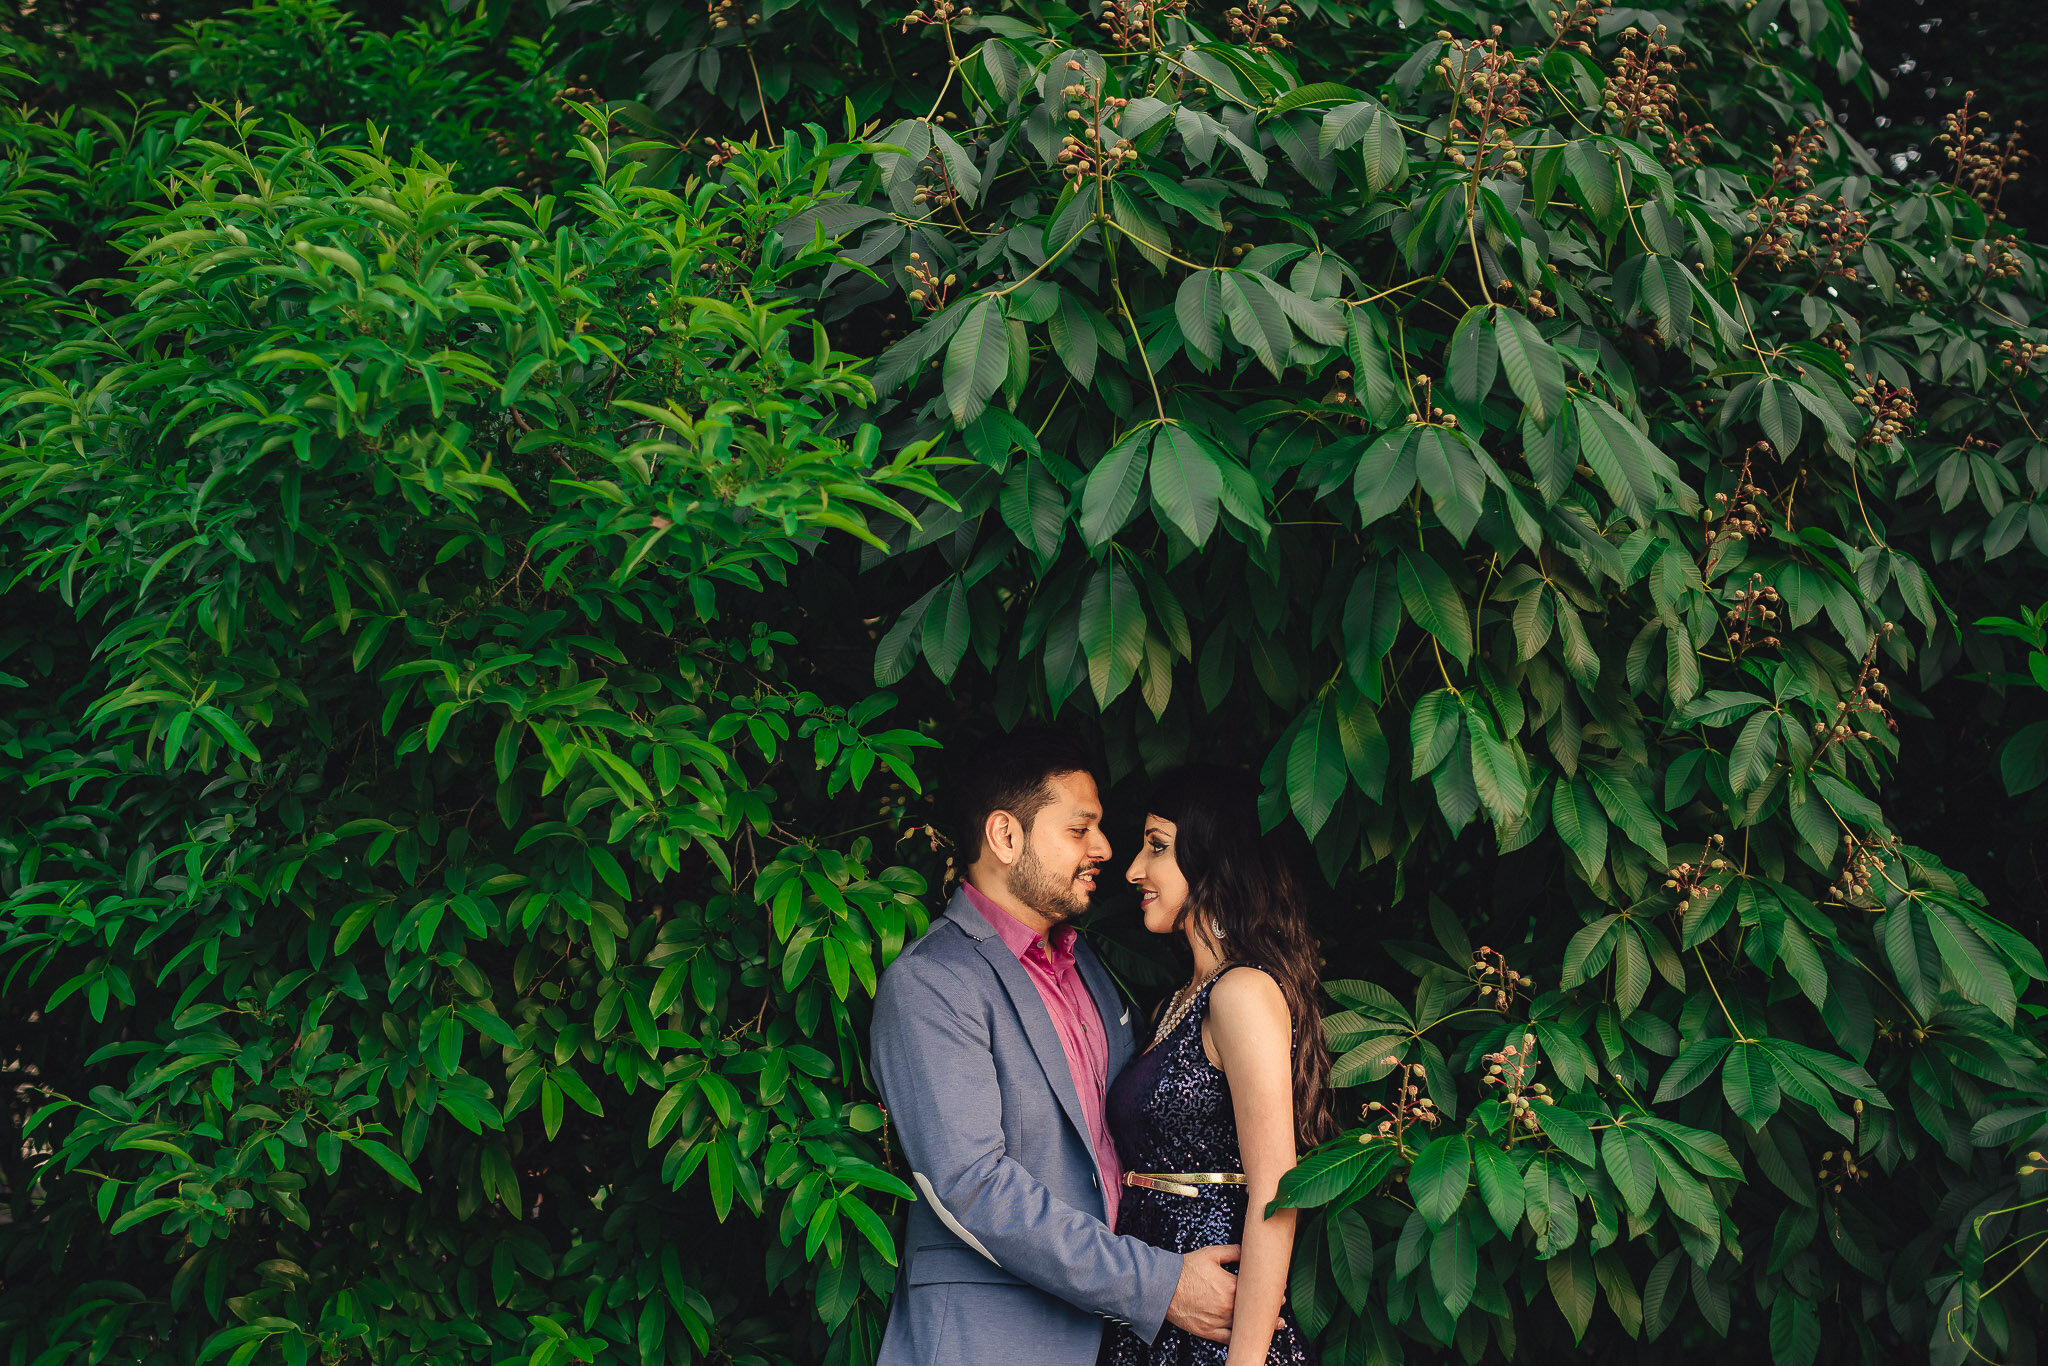 NEW YORK CITY ENGAGEMENT PHOTO SESSION AT CENTRAL PARK AND DUMBO, BROOKLYN Photographed by Top Indian Wedding Photographer Manish and Sung Photography.